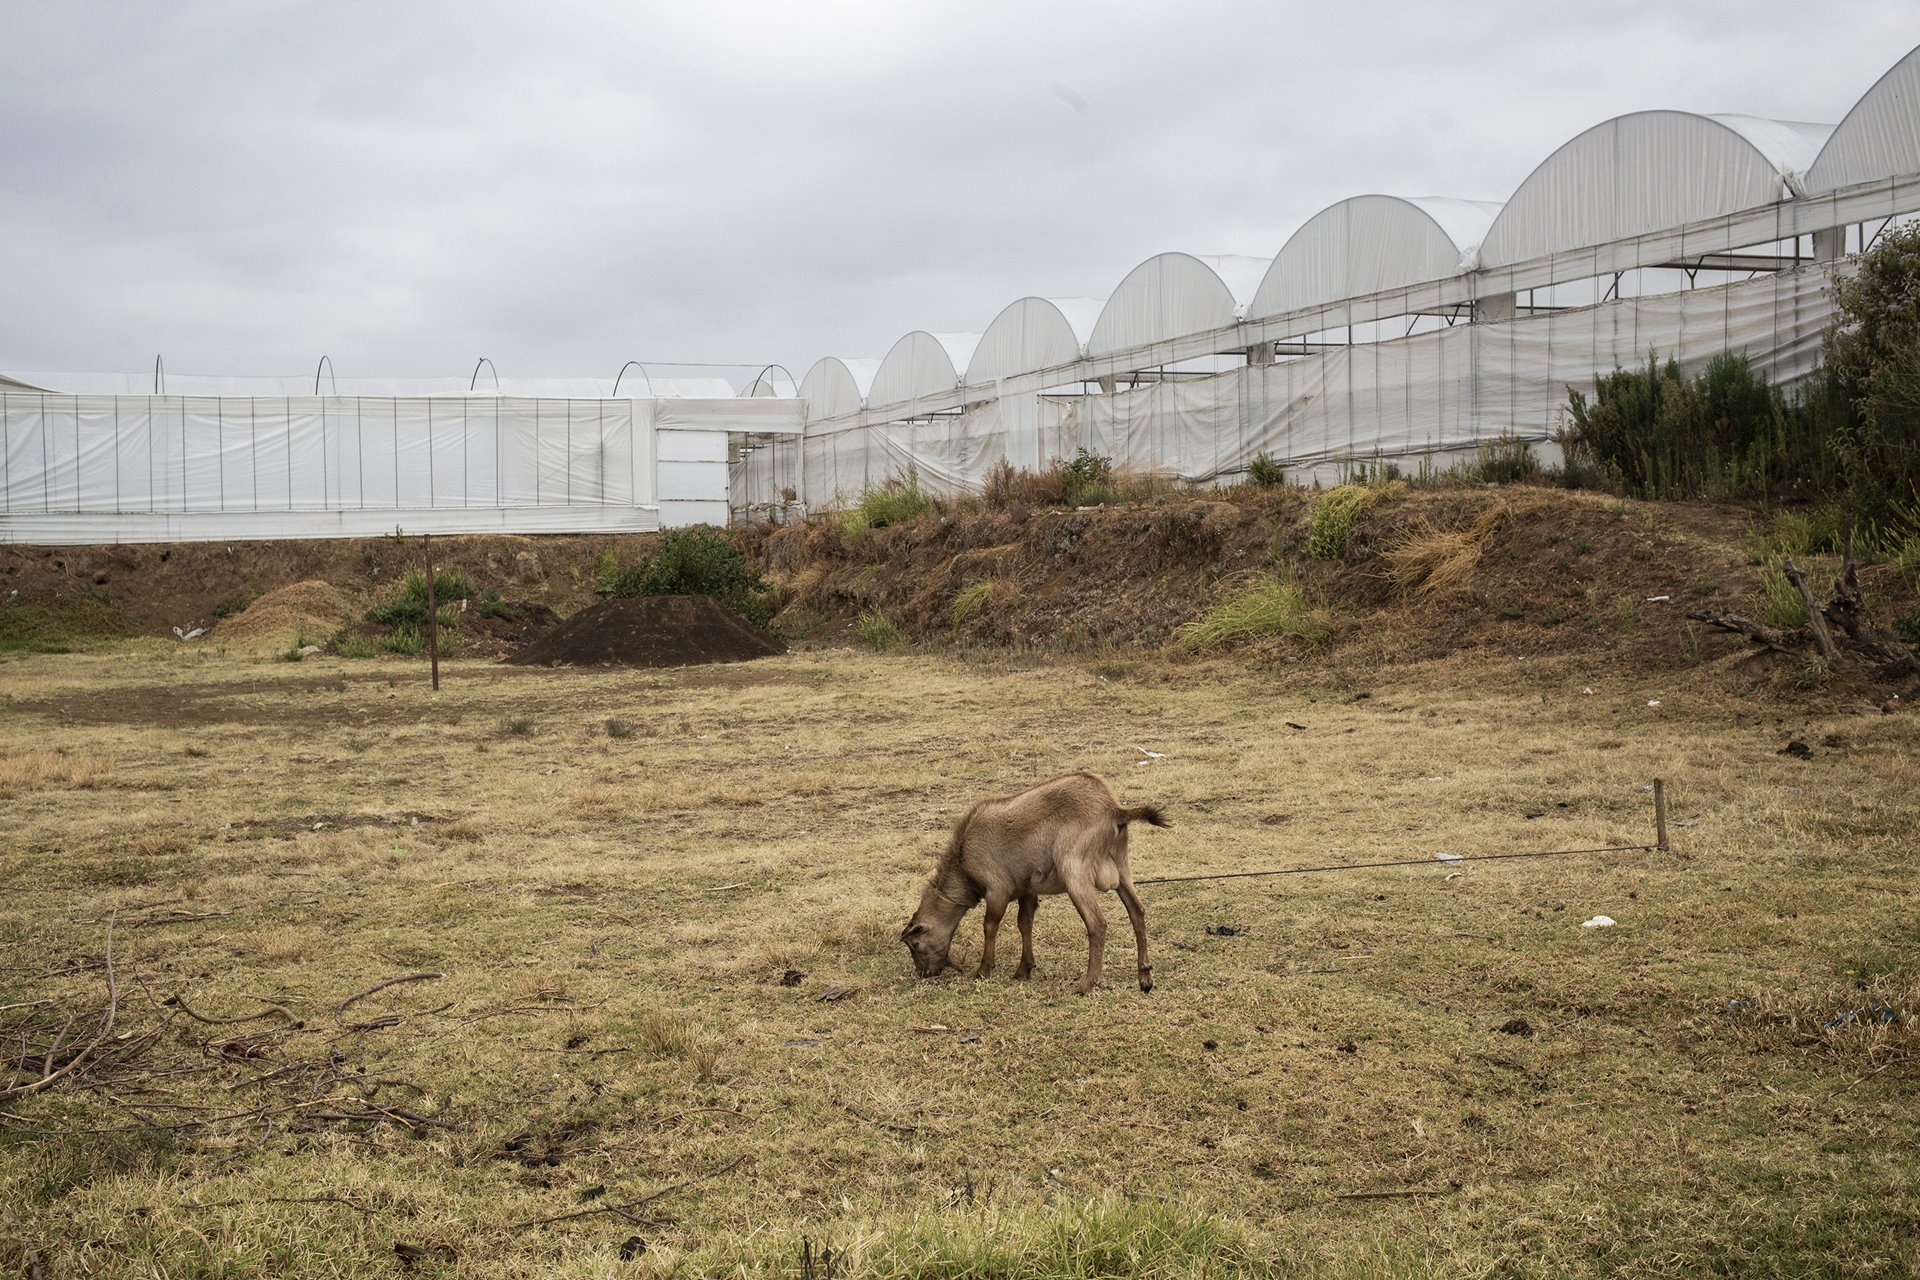 A goat grazing in a field amidst floriculture greenhouses, in Villa Guerrero, Mexico. A Royal Society of Chemistry paper has found that when animals feed on plants exposed to pesticides, toxic residues can enter and accumulate in parts of the animal that are later consumed by humans.